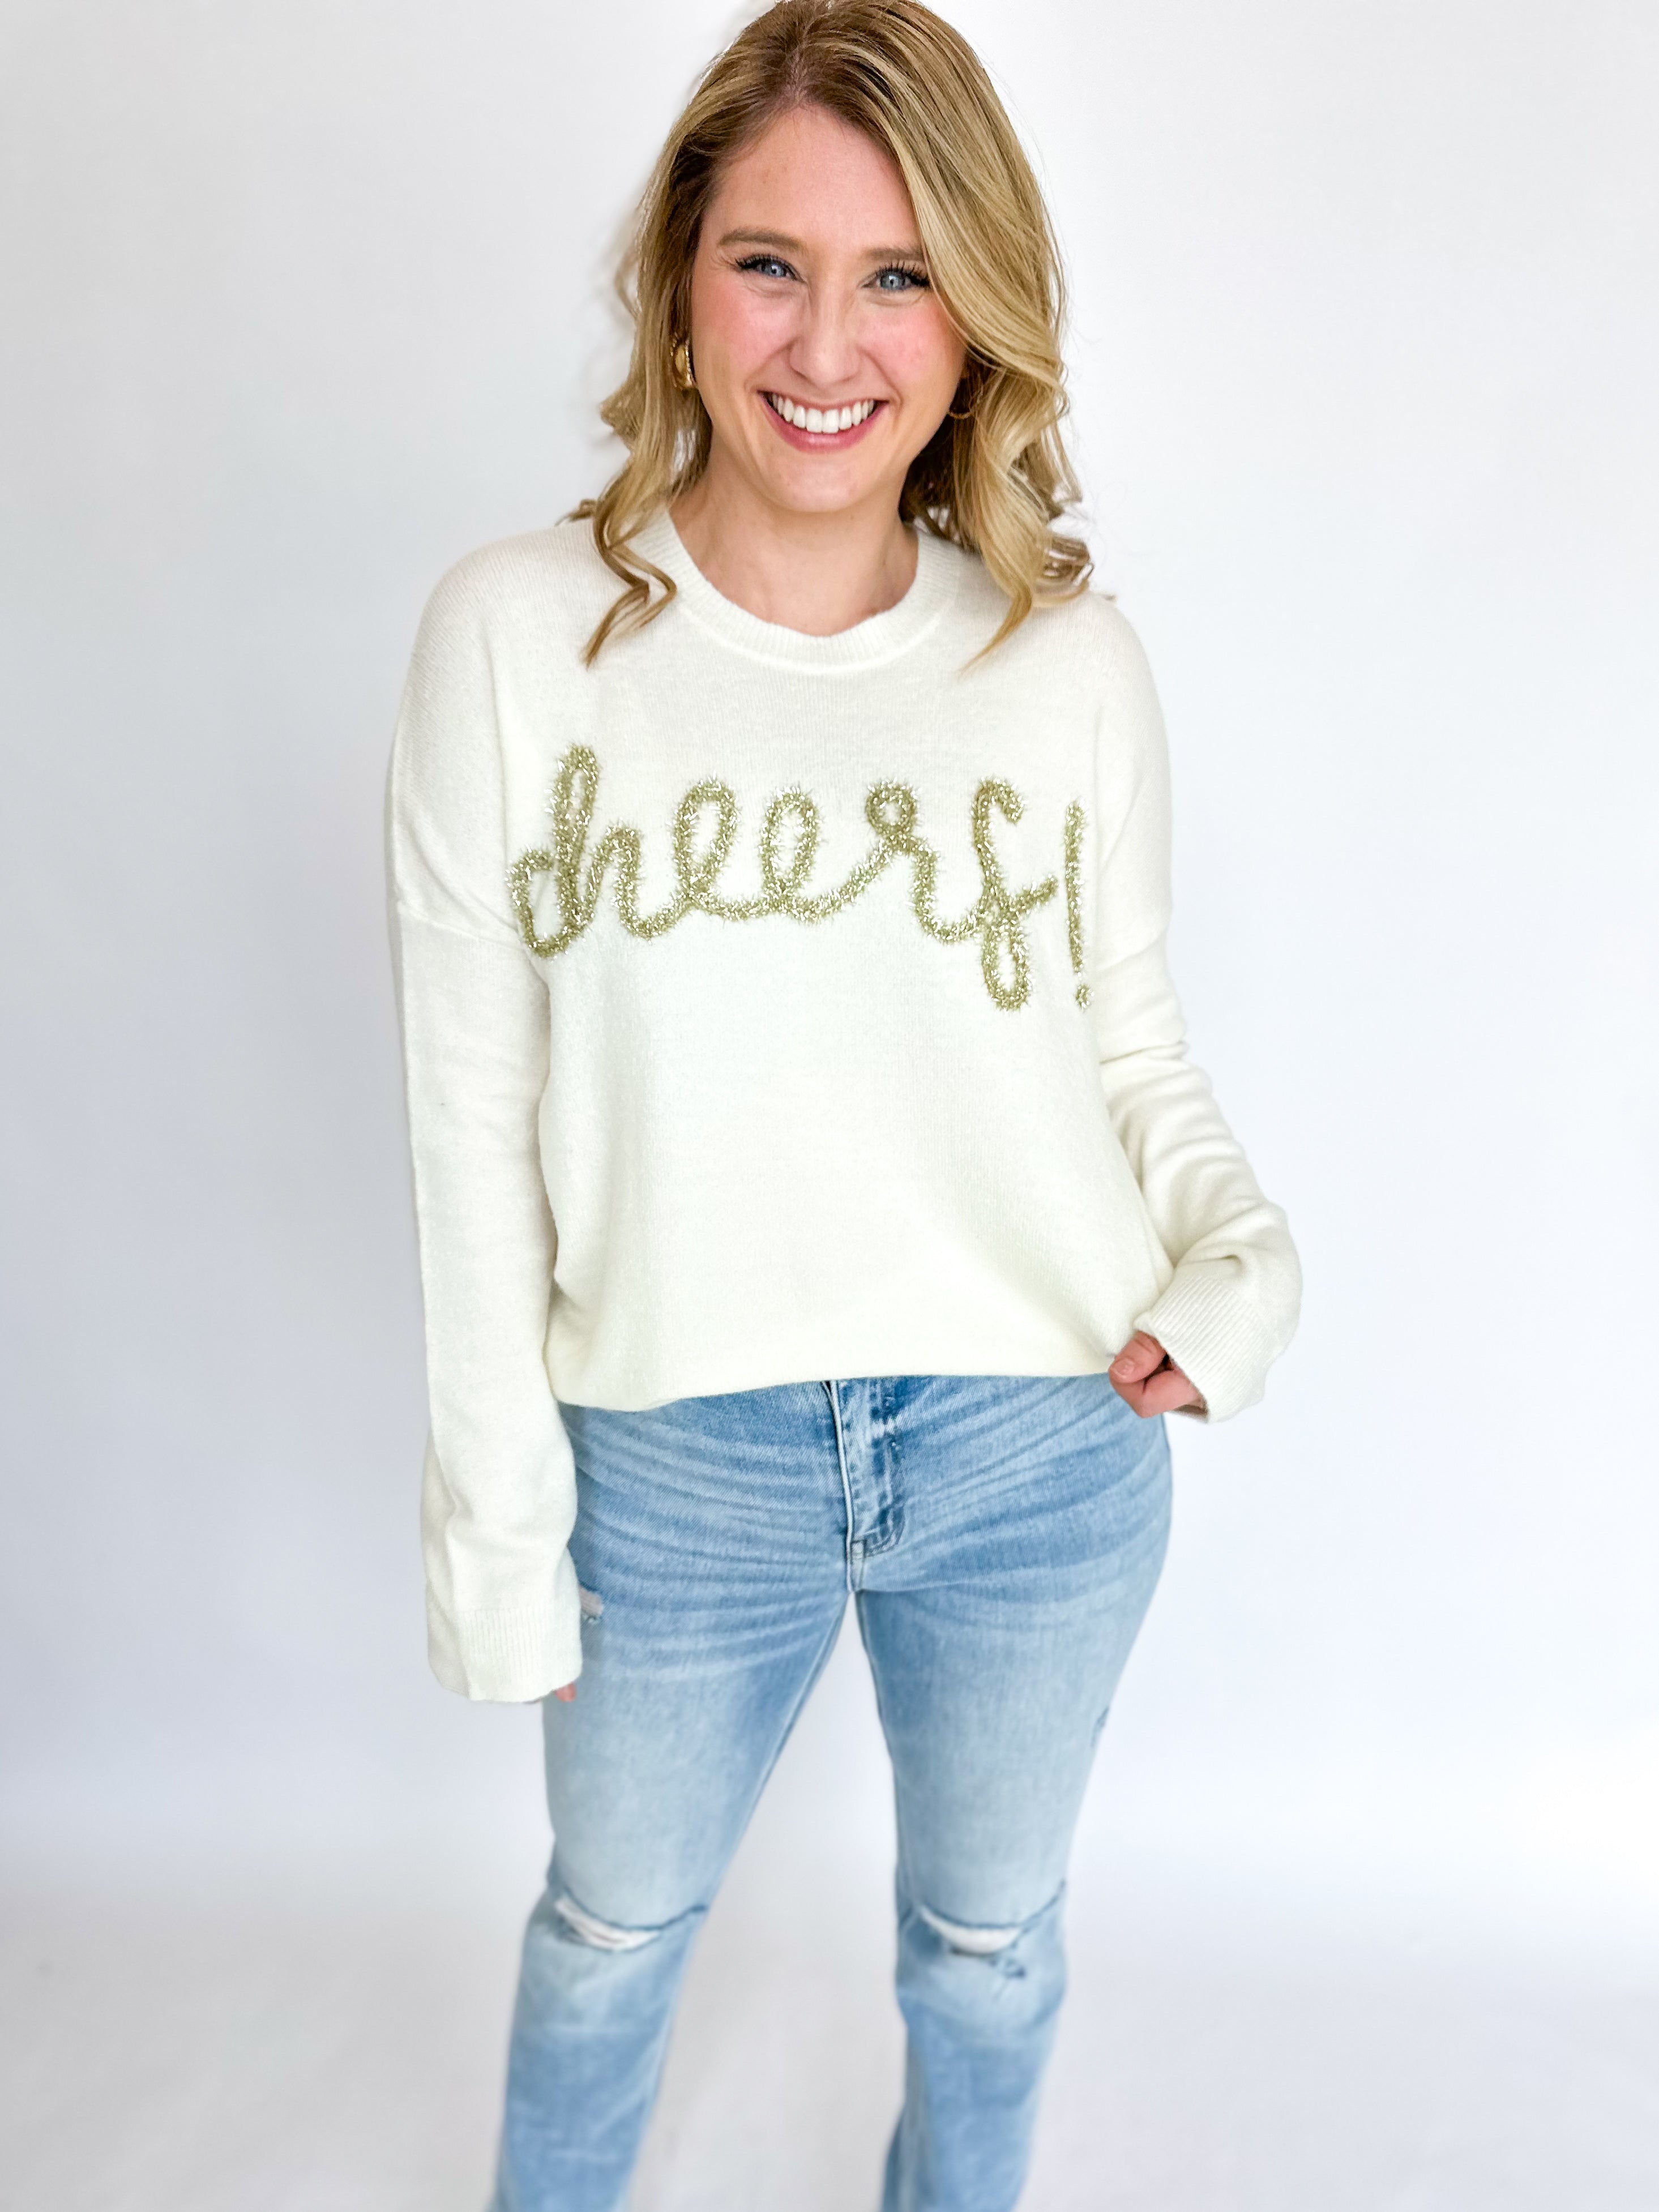 Cheers Tinsel Cream Sweater-230 Sweaters/Cardis-GILLI CLOTHING-July & June Women's Fashion Boutique Located in San Antonio, Texas